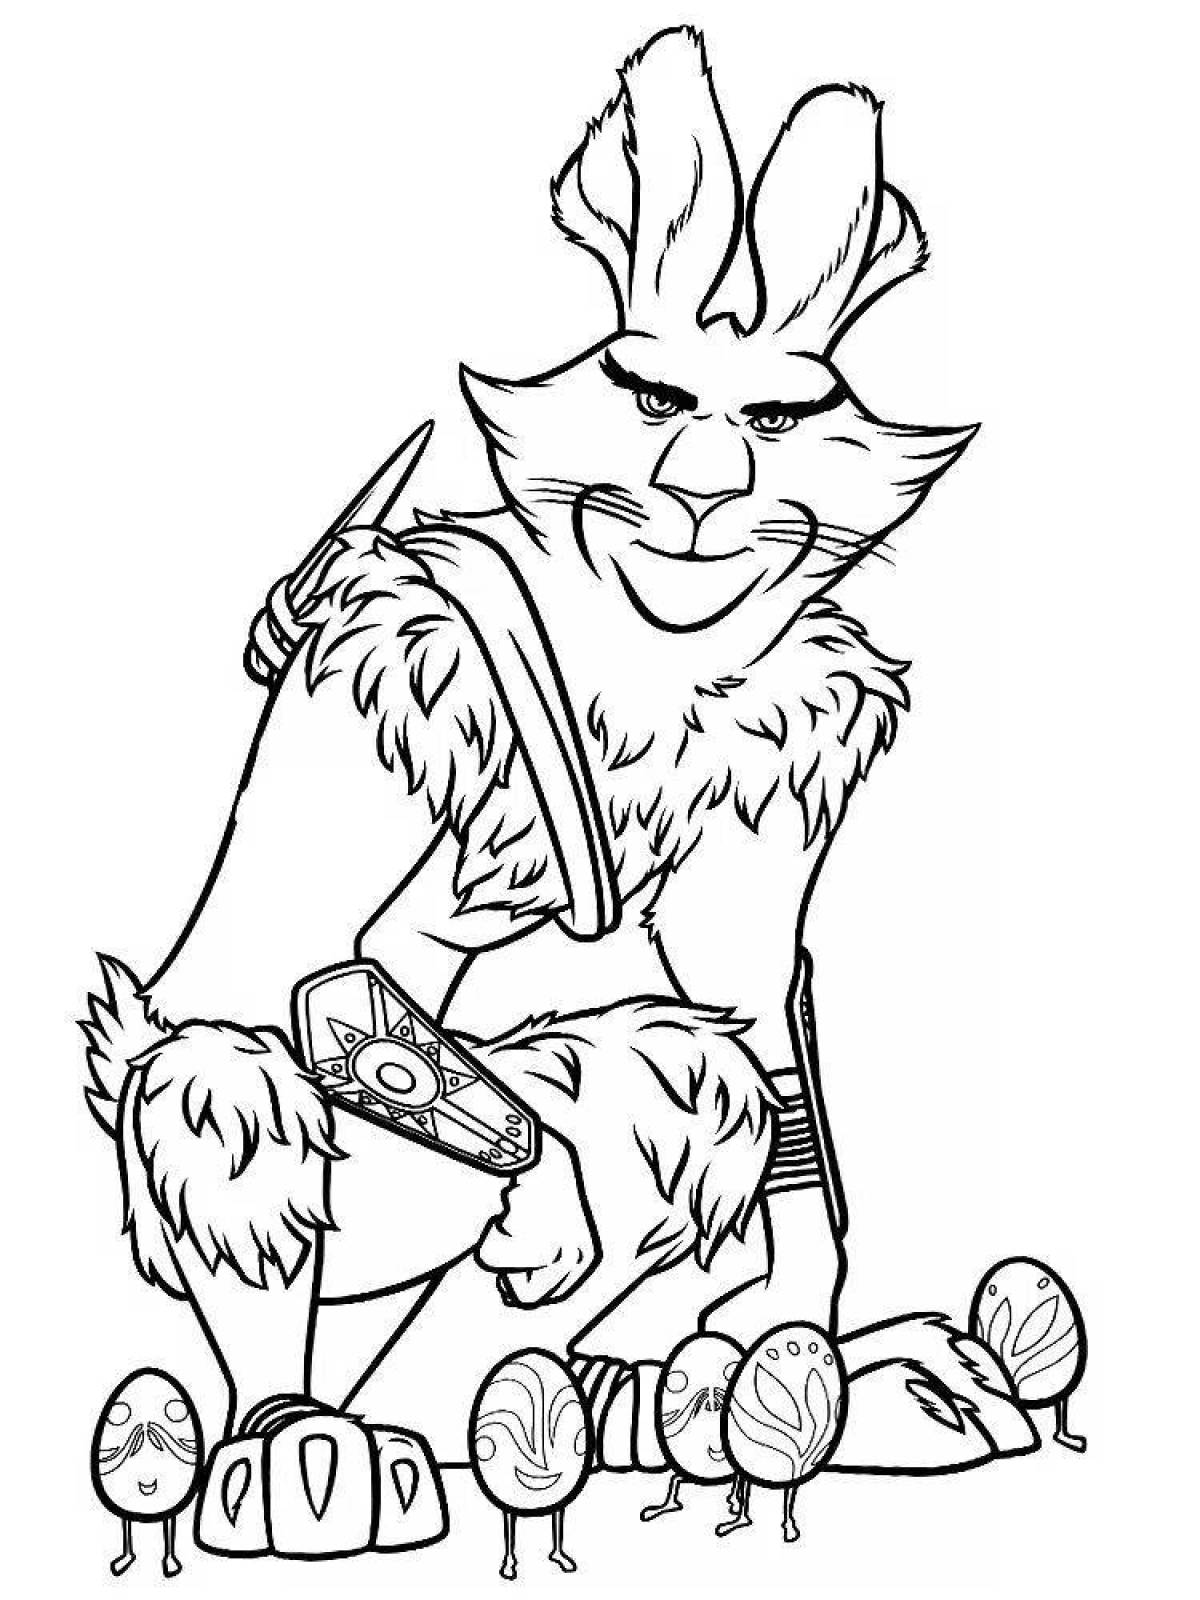 Adorable Rise of the Guardians Coloring Page